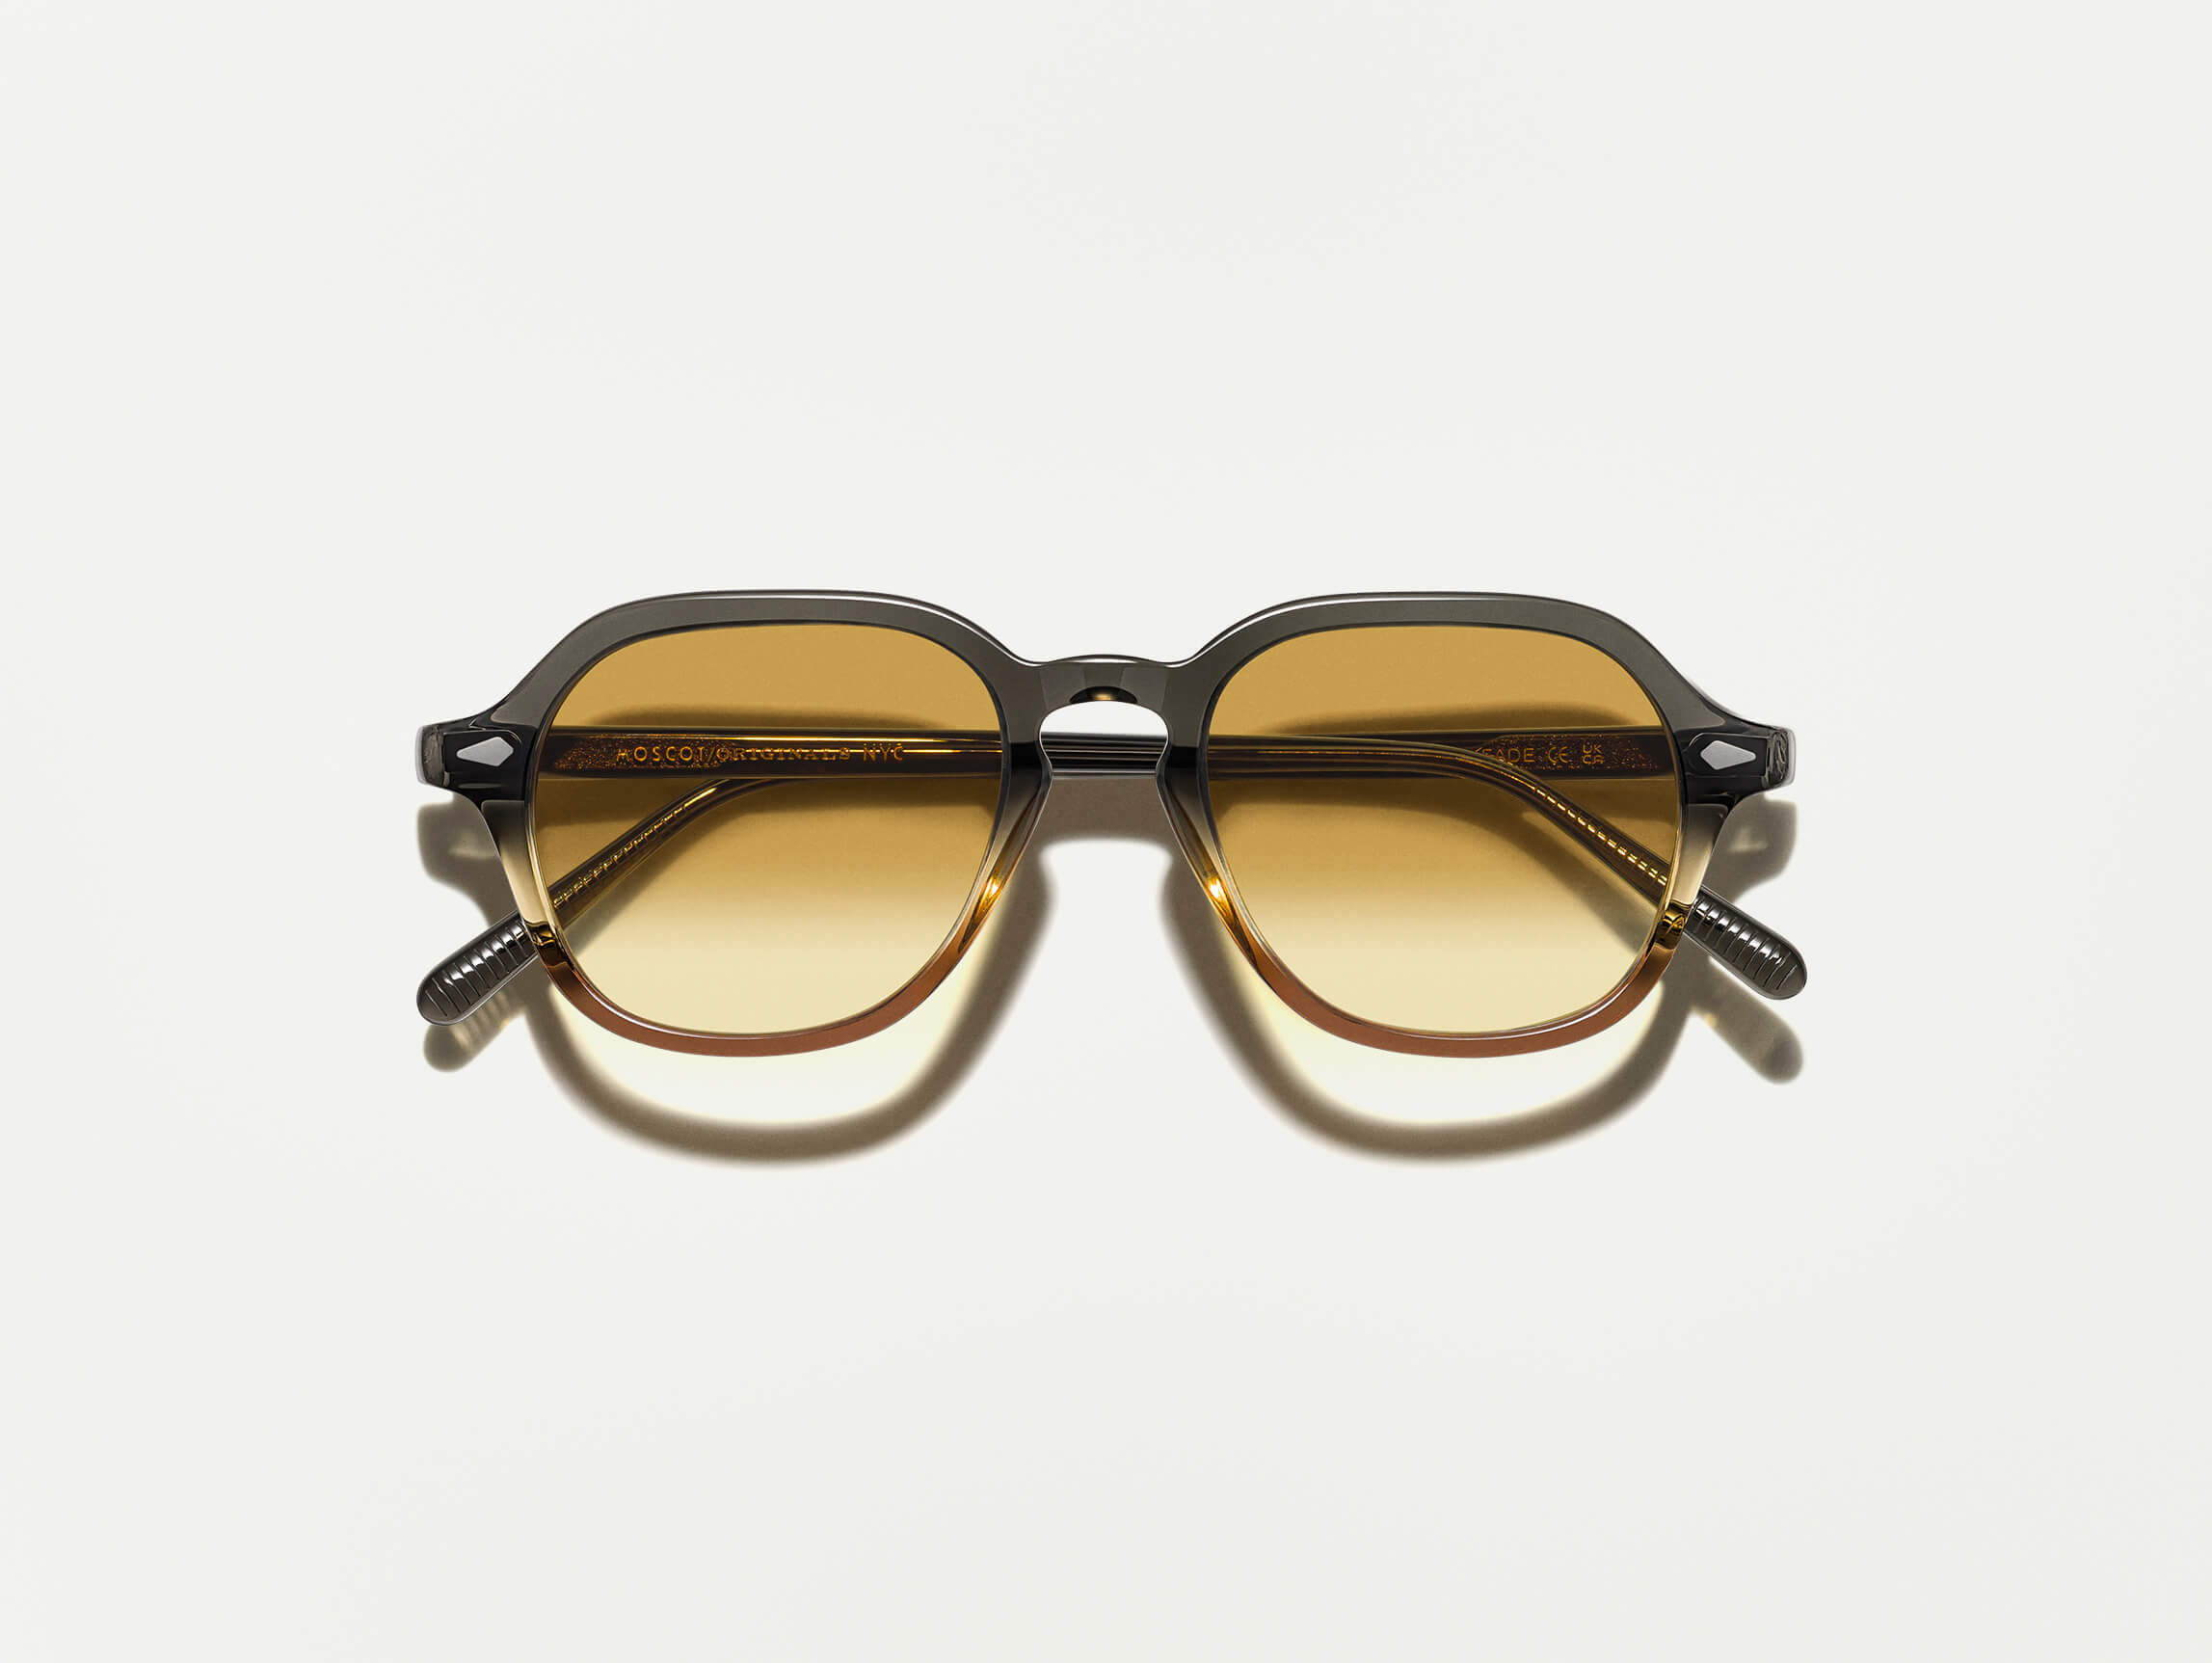 The YENEM SUN in Grey-Brown Fade with Chestnut Fade Tinted Lenses